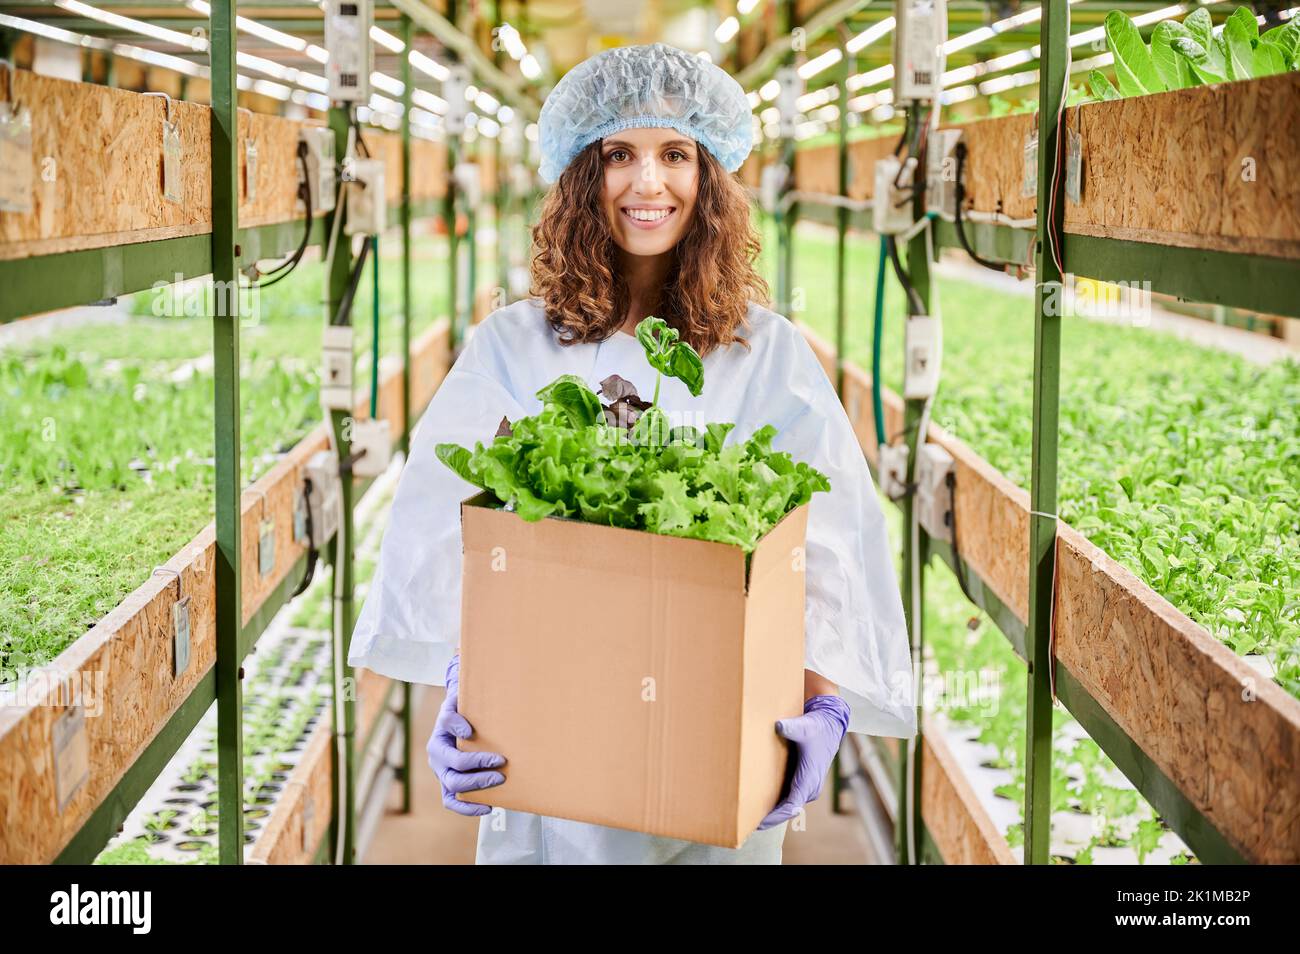 Joyful female gardener looking at camera and smiling while holding cardboard package box with green leafy plants. Woman with packed leafy greens standing near shelves with seedlings in greenhouse. Stock Photo